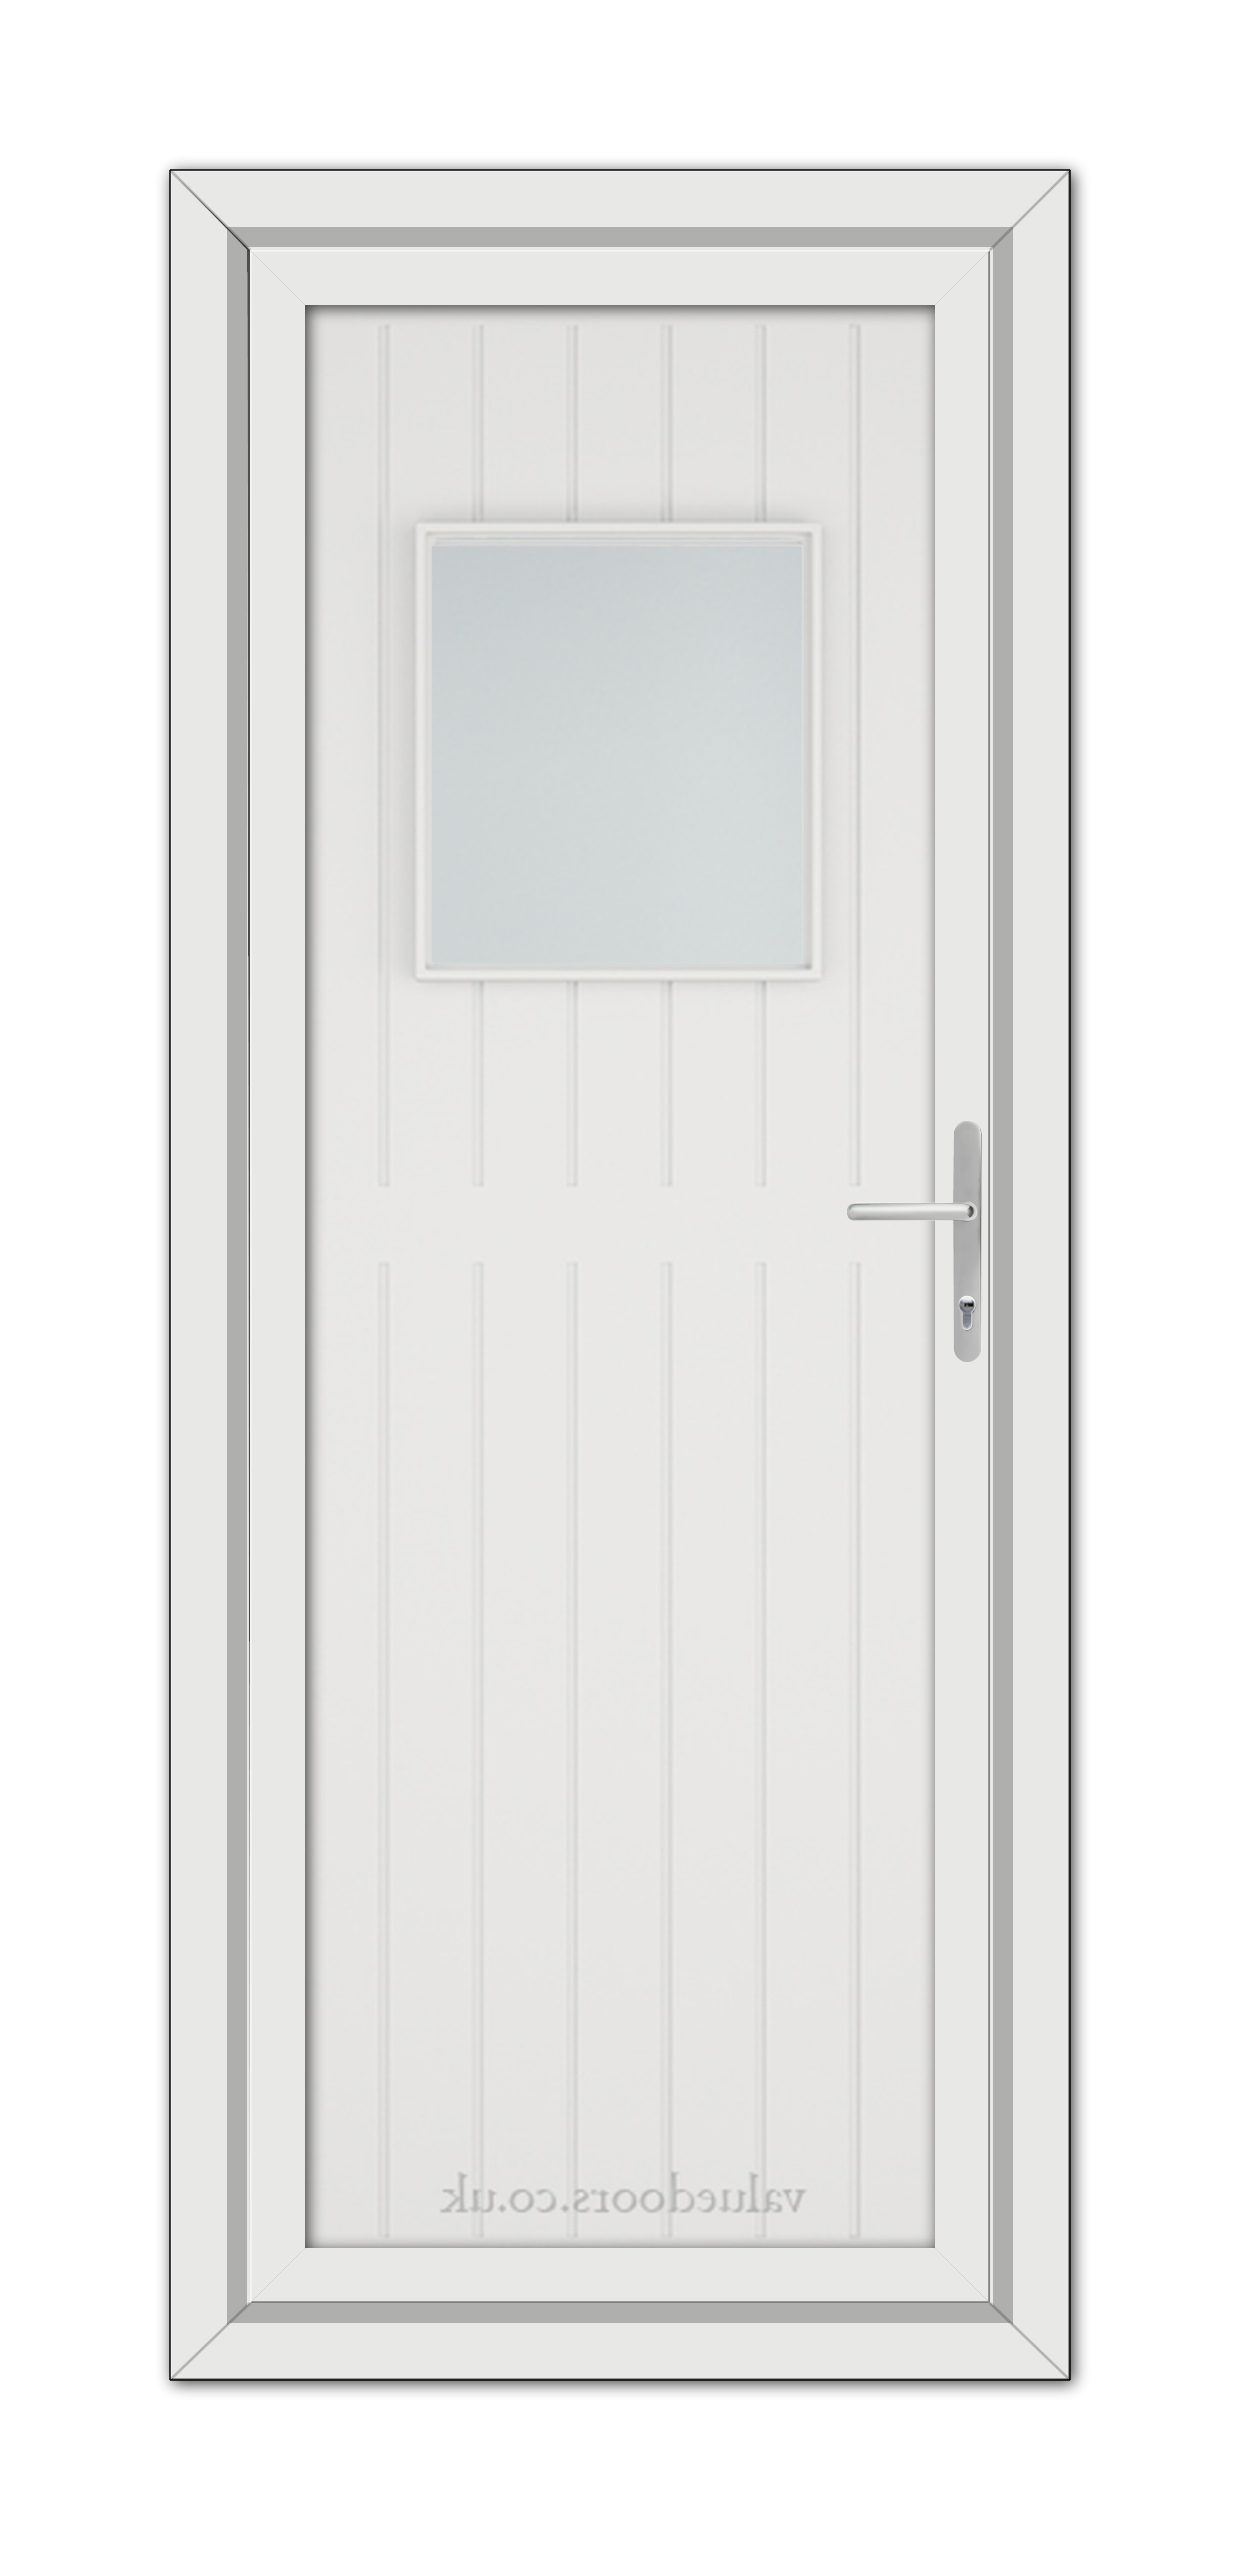 A White Chatsworth uPVC Door with a rectangular frosted glass window at the top and a metallic handle on the right side.